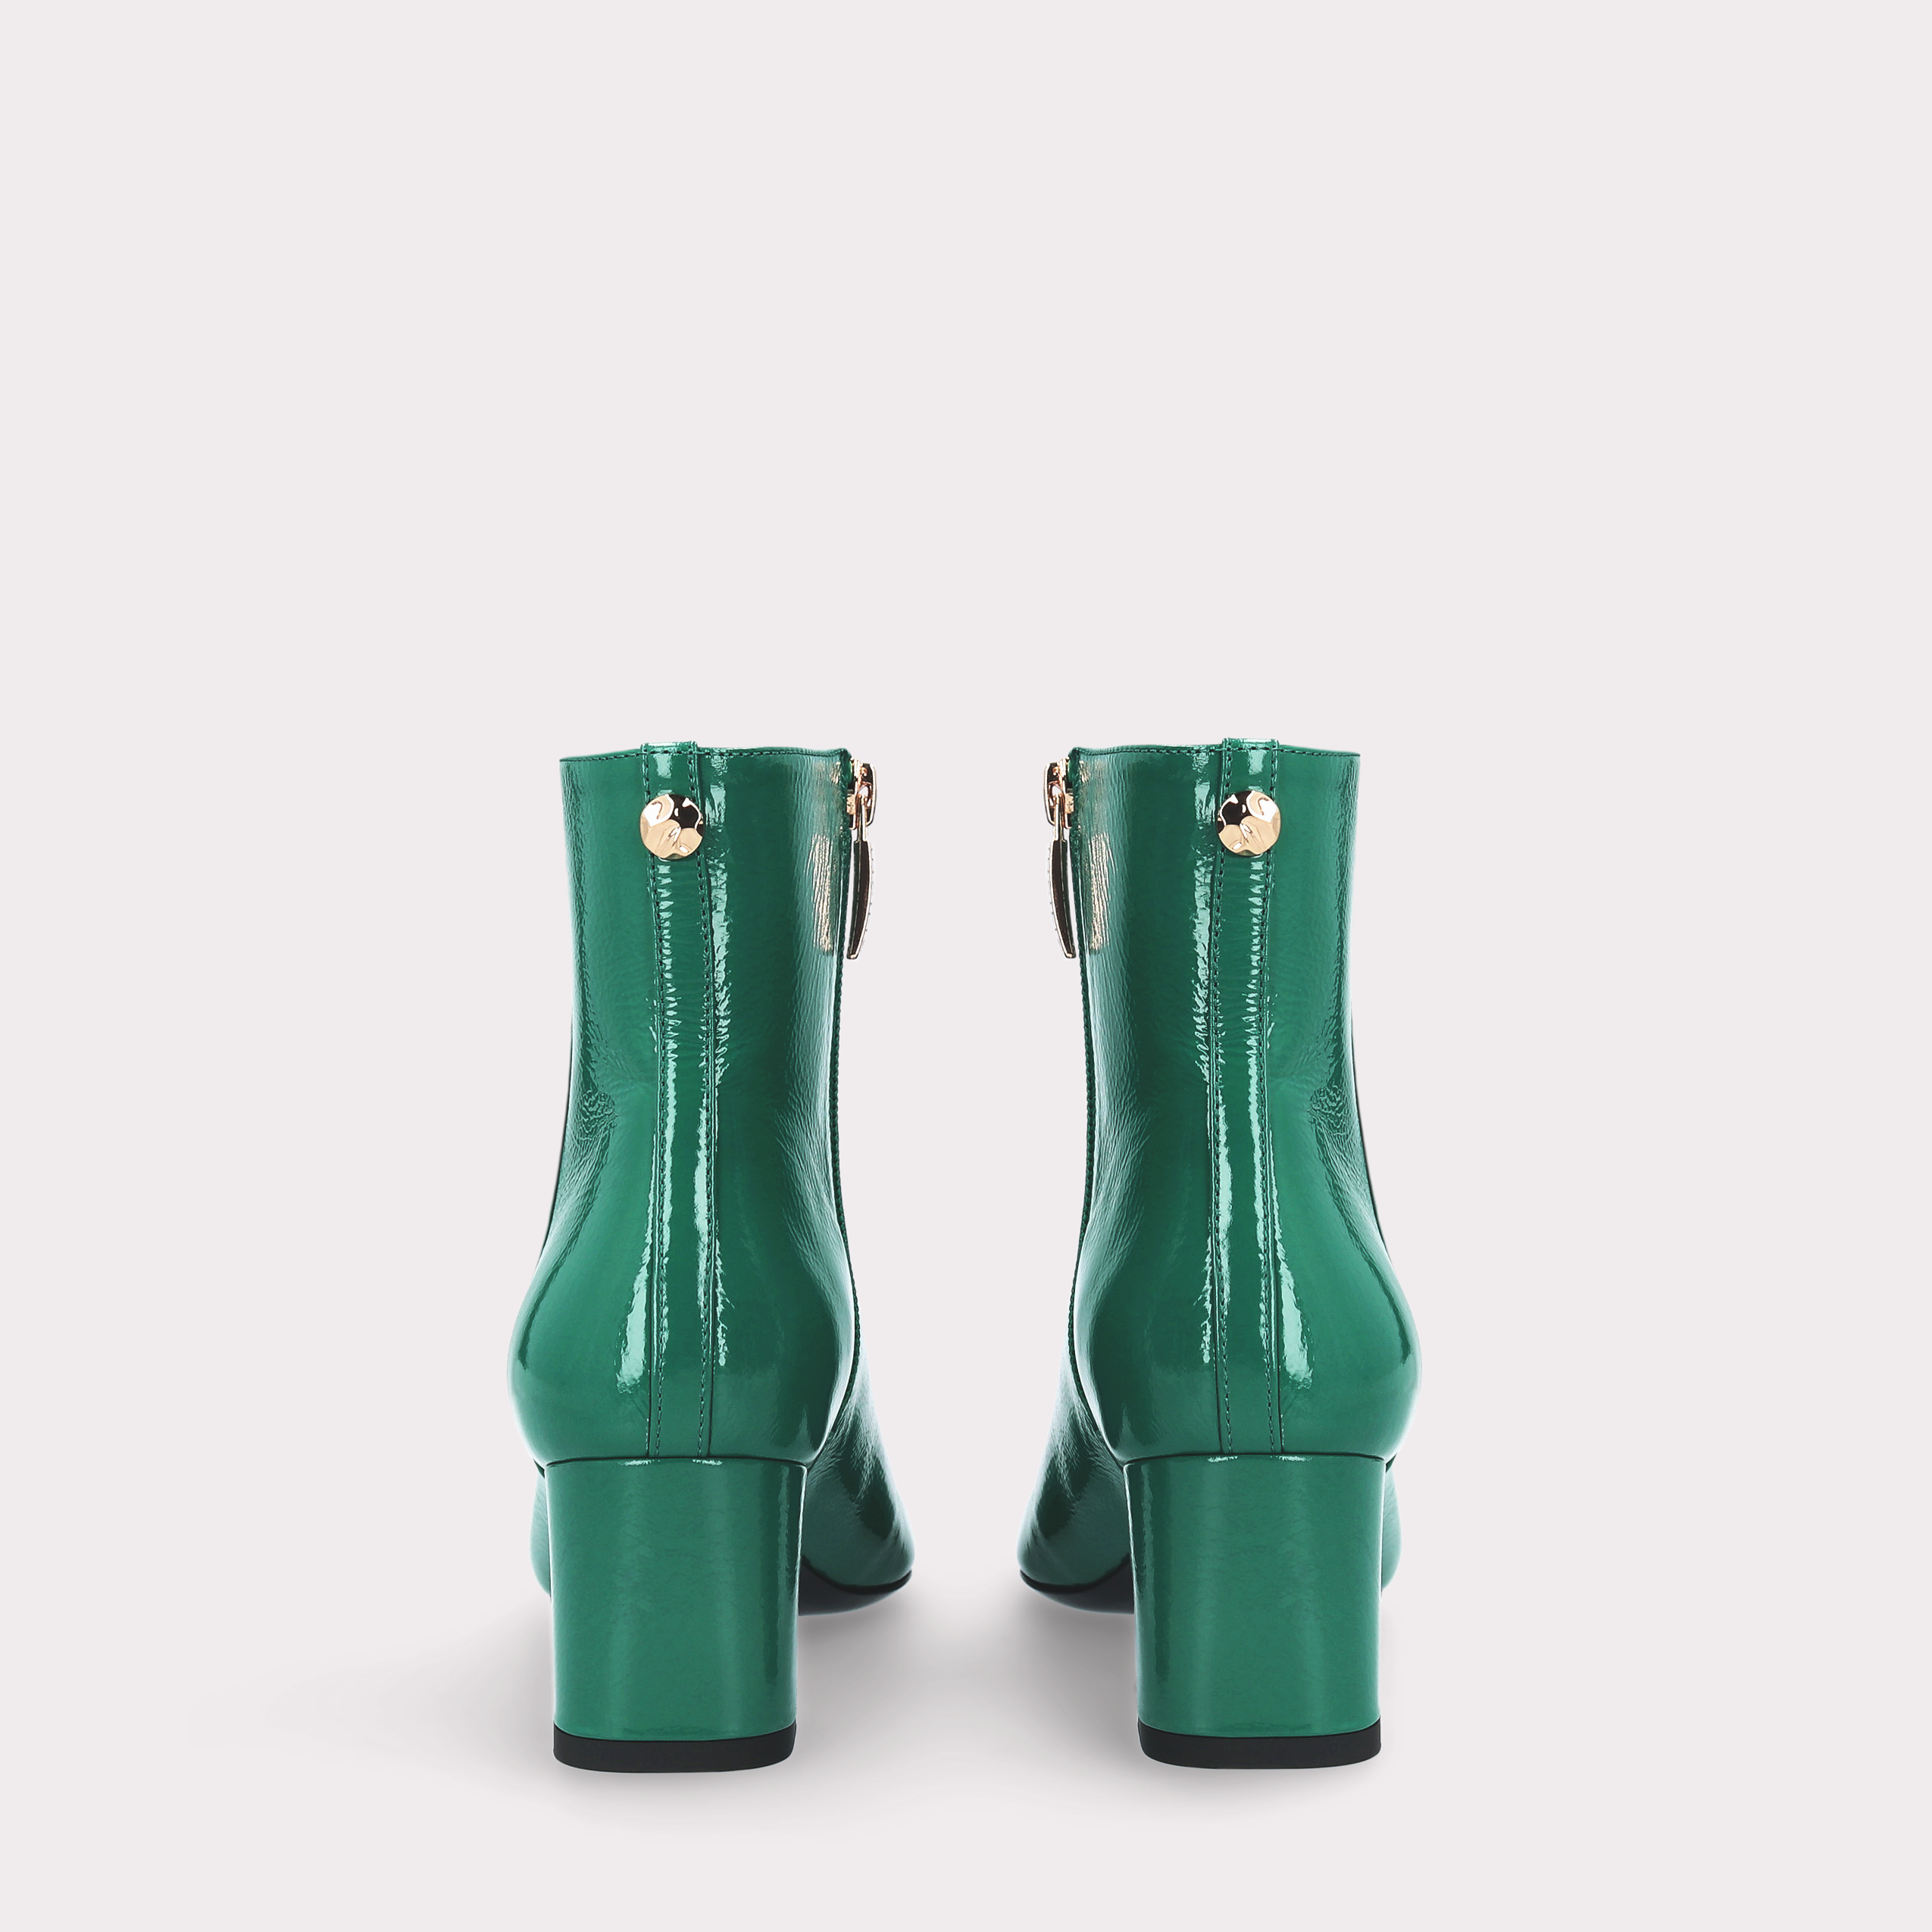 DEBBY ZIP 01 GREEN CRUSHED PATENT LEATHER ANKLE BOOTS